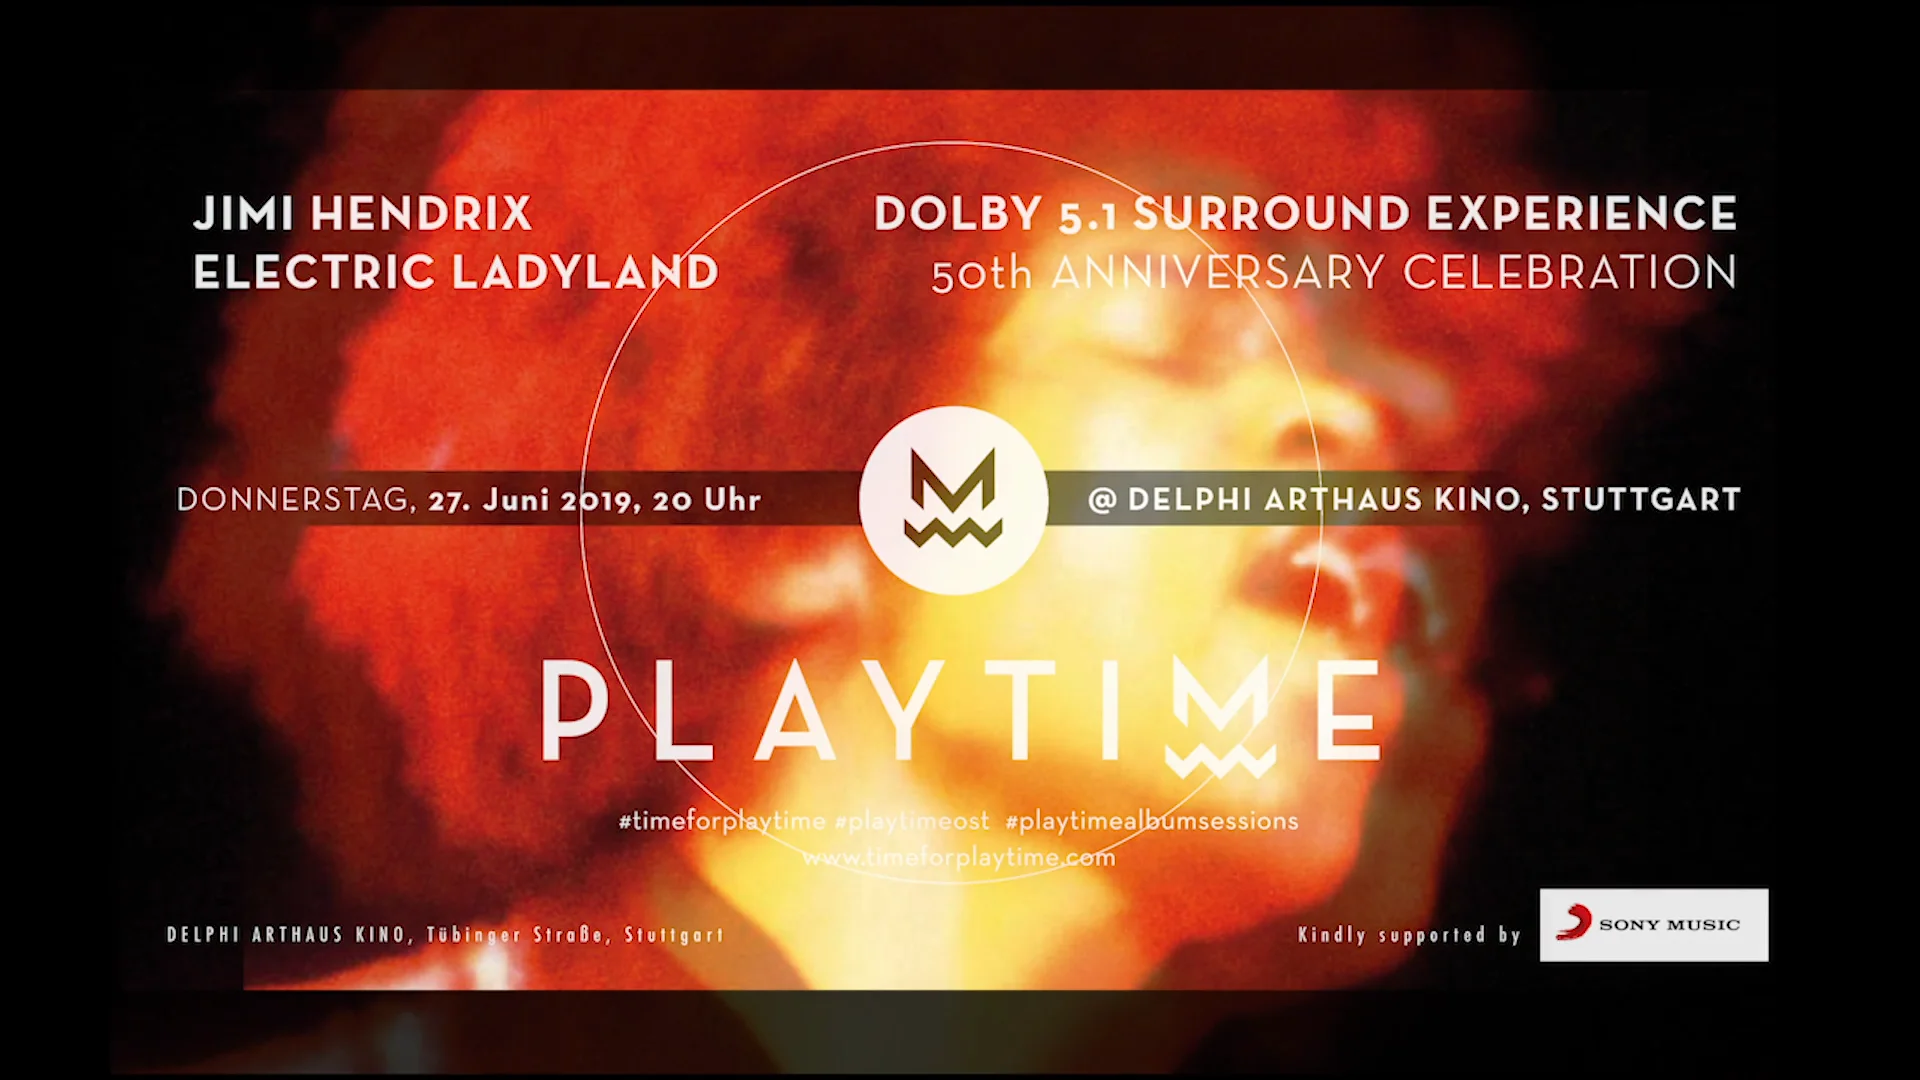 EXPERIENCE PLAYTIME